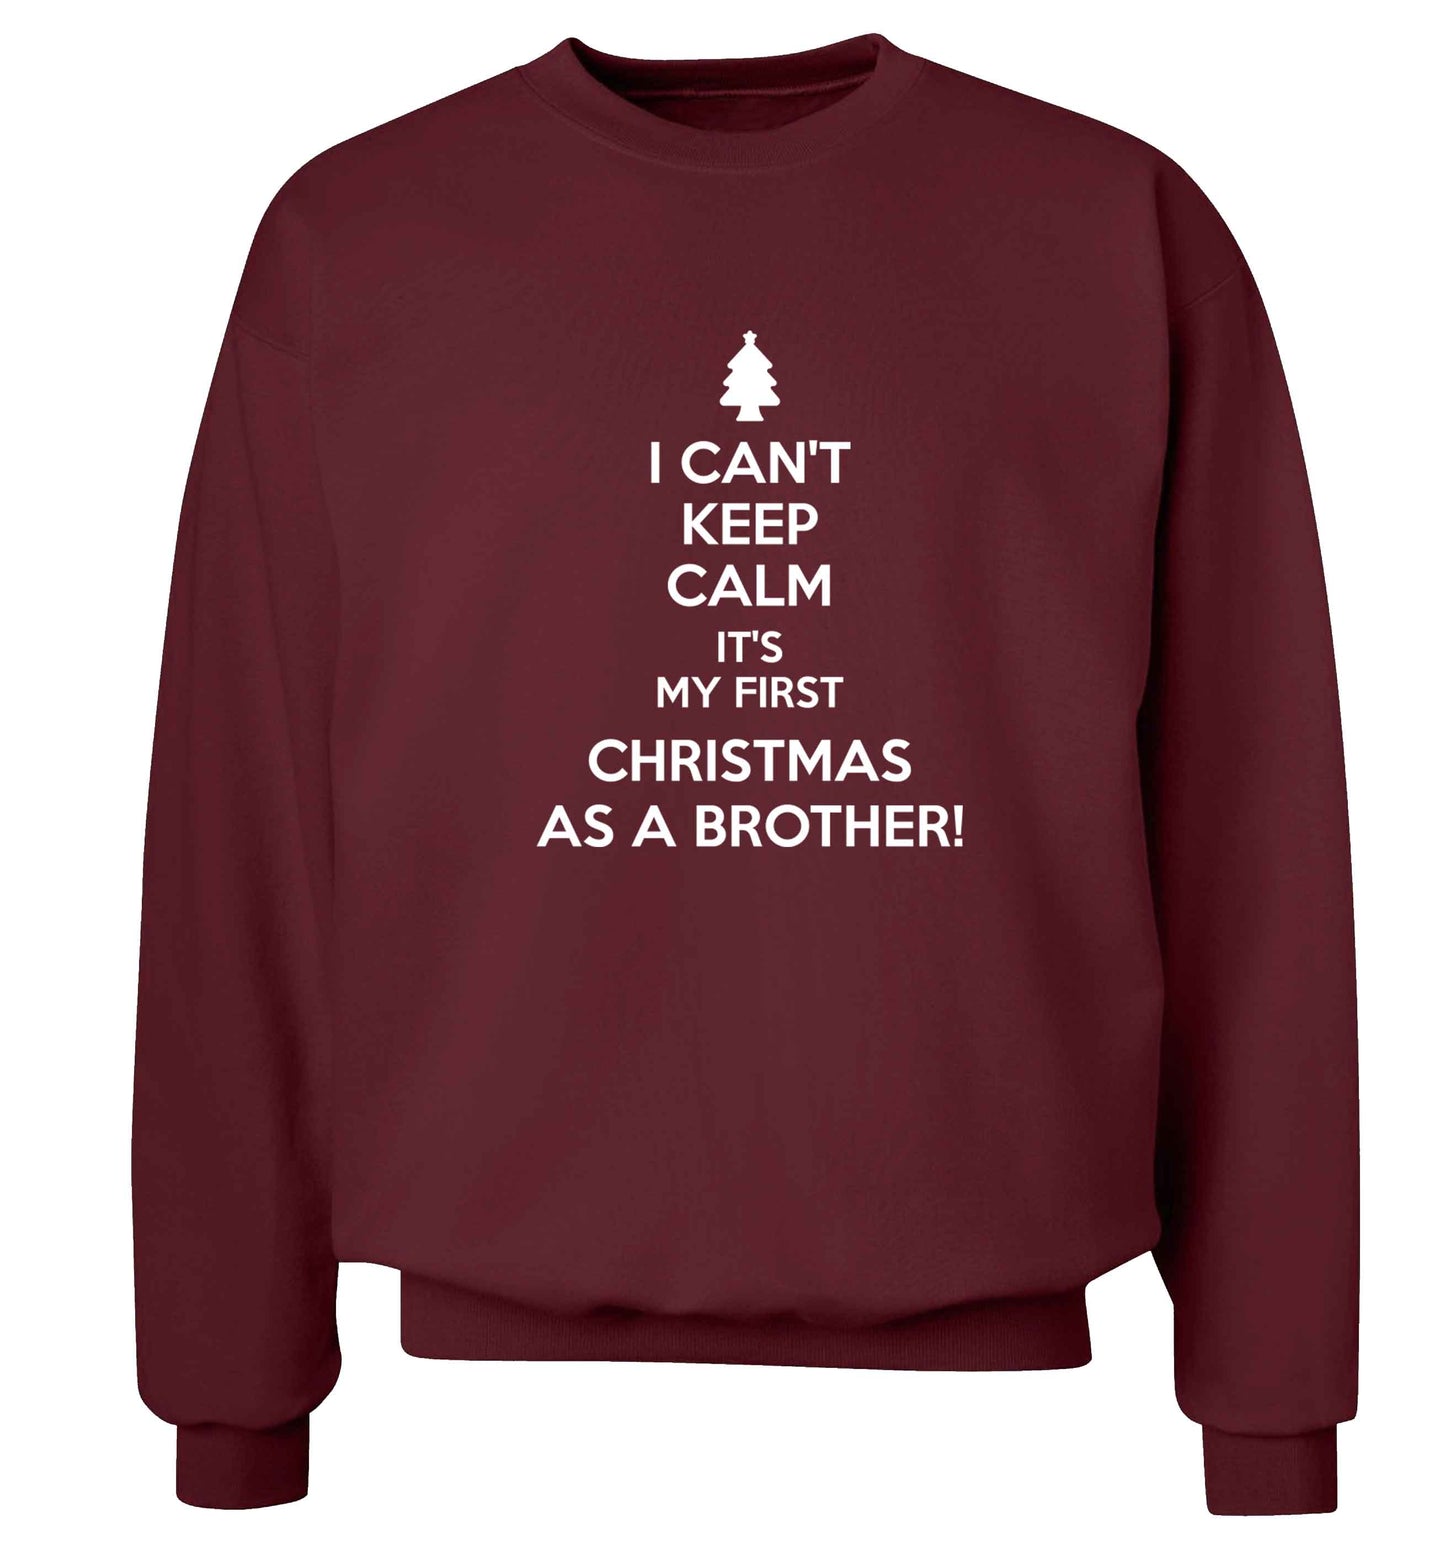 I can't keep calm it's my first Christmas as a brother! Adult's unisex maroon Sweater 2XL